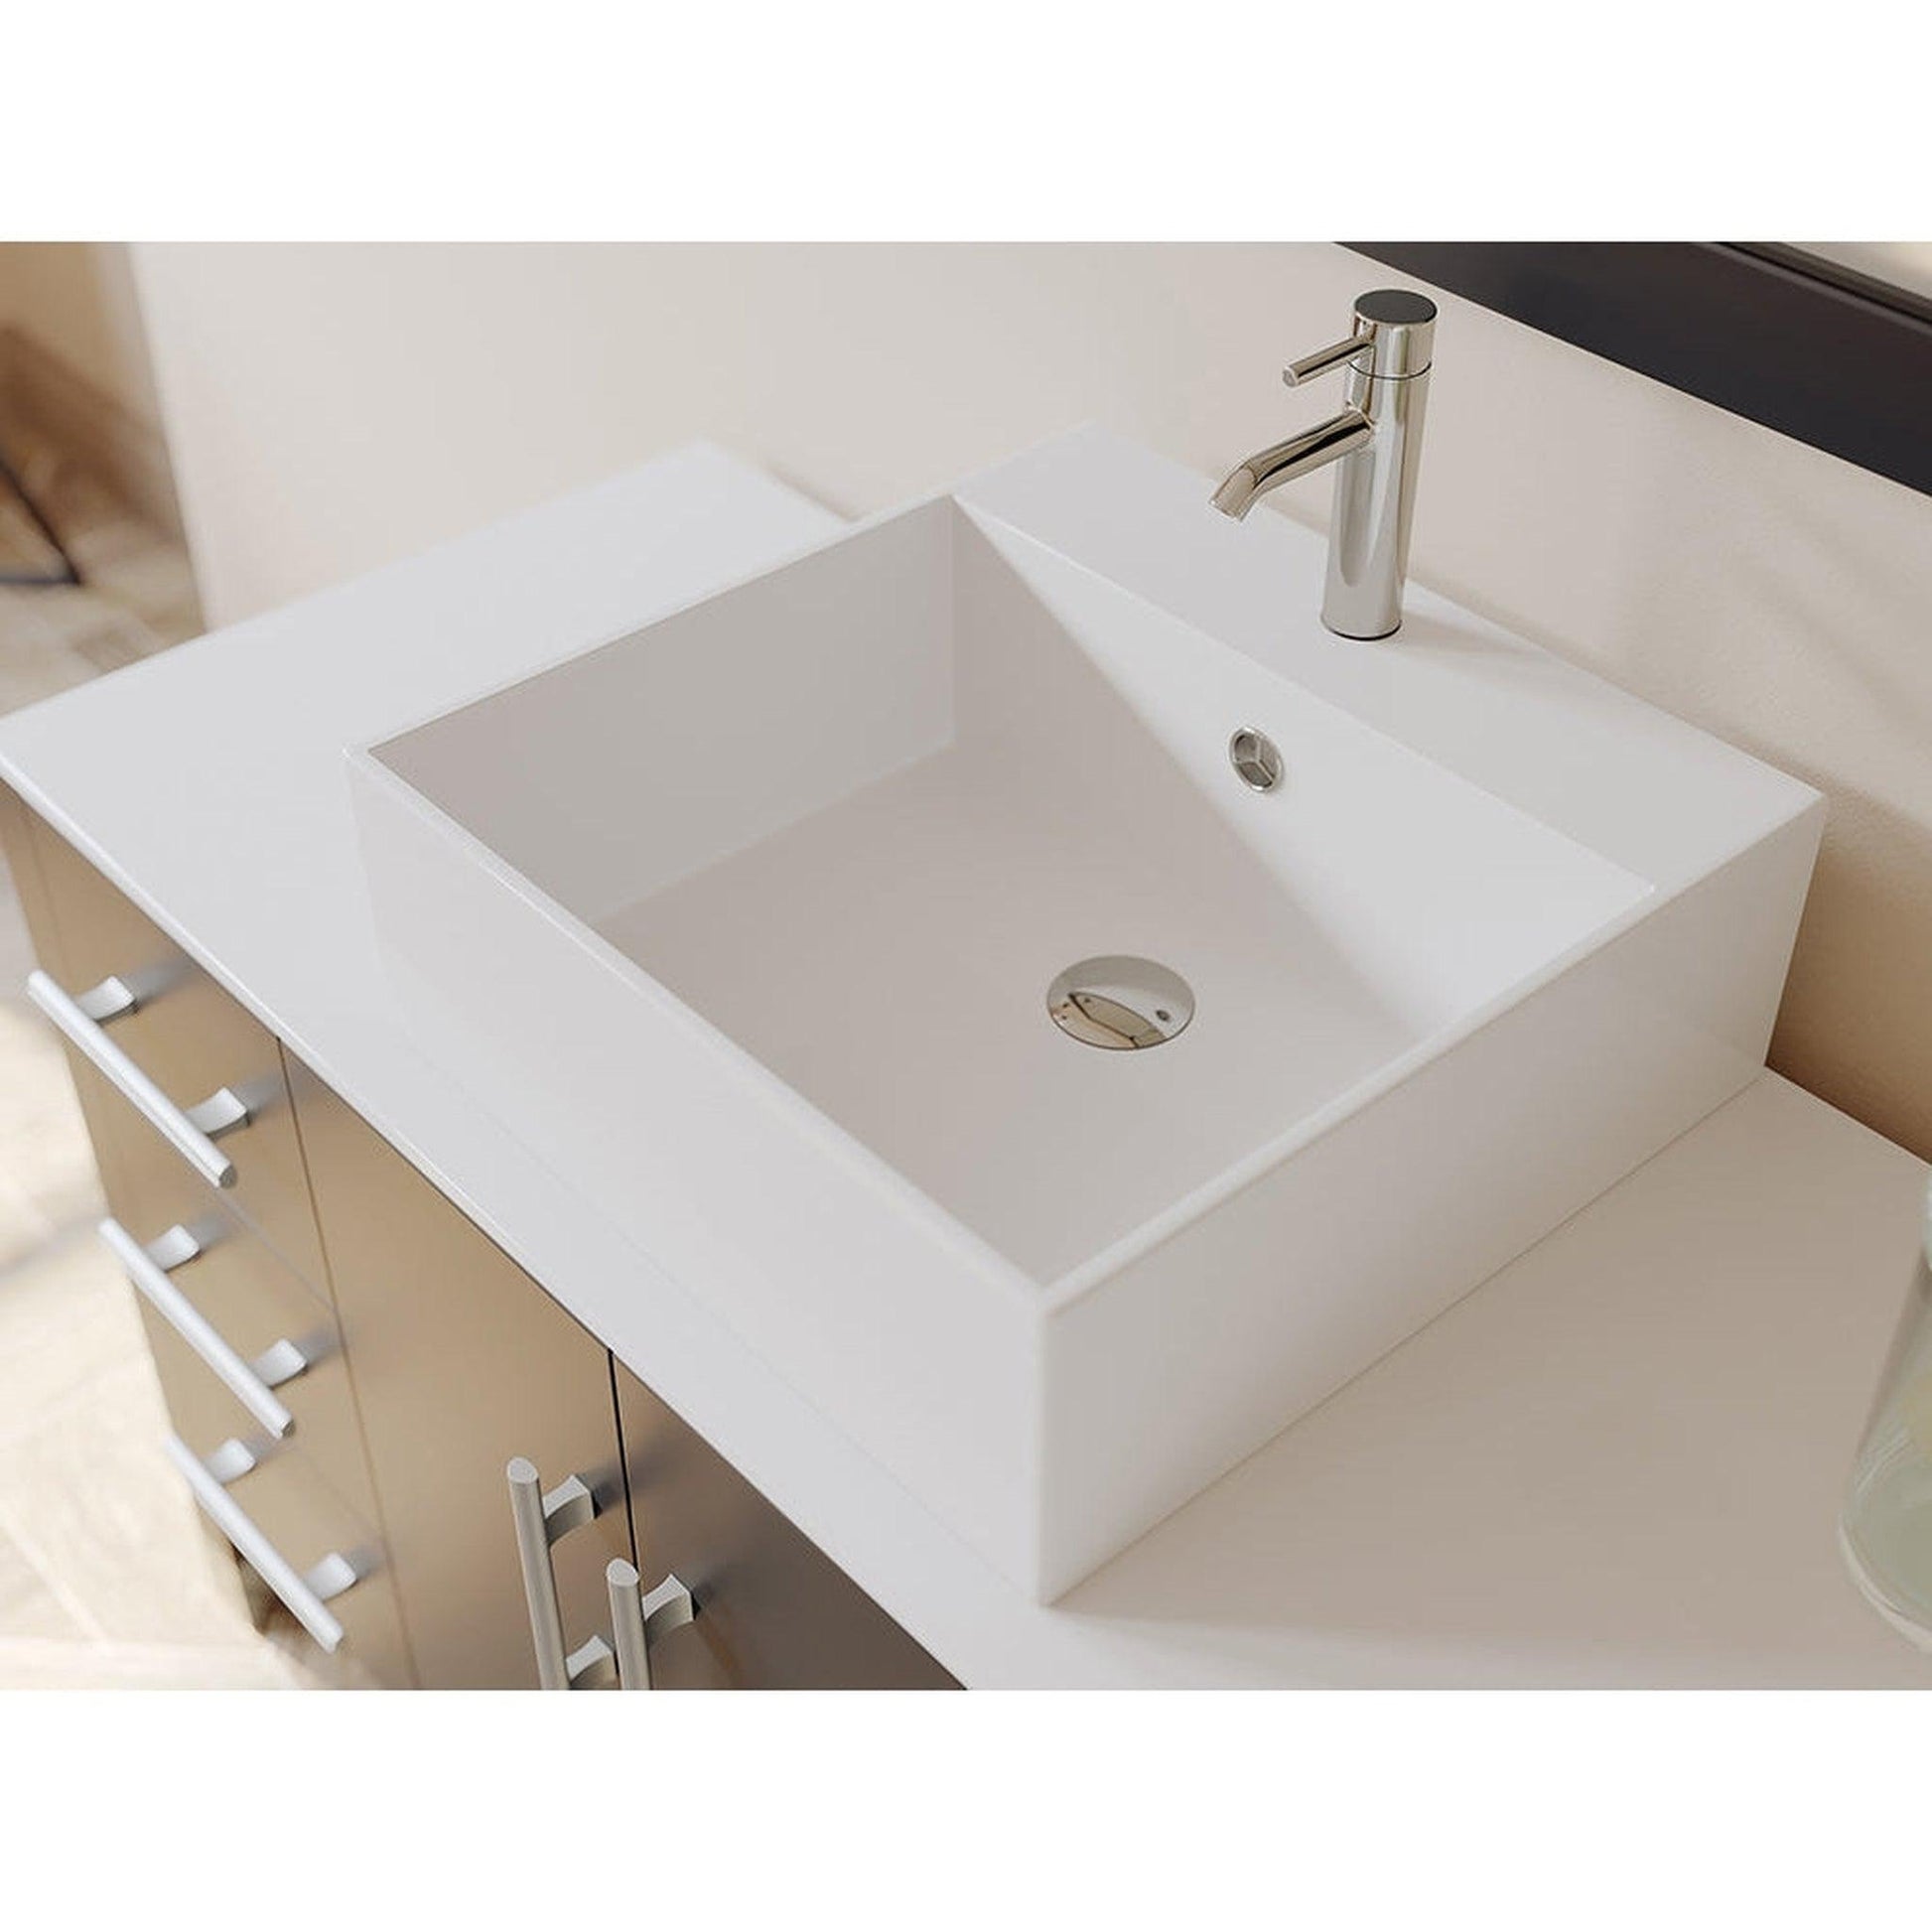 Cambridge Plumbing 48" Black Espresso Wood Single Vanity Set With Porcelain Square Vessel Sink With Faucet Hole And Brushed Nickel Plumbing Finish